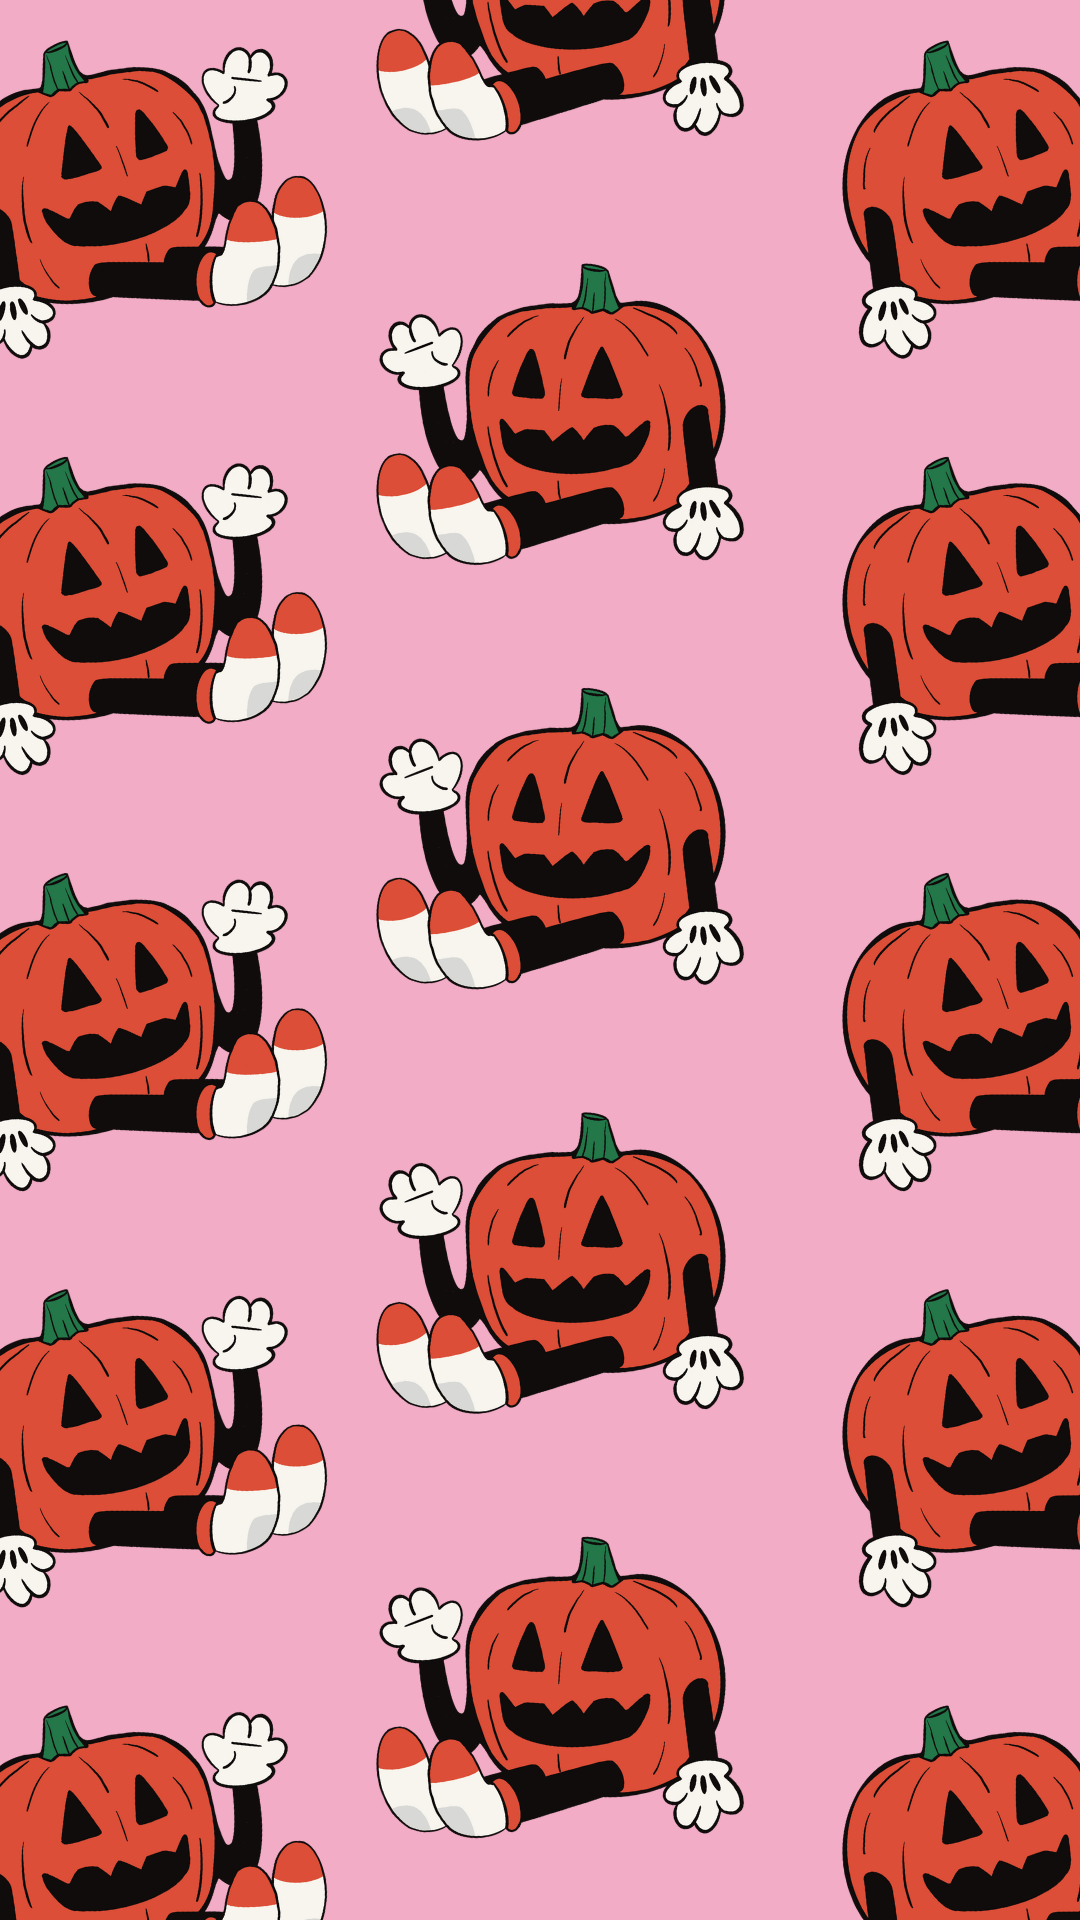 A pattern of pumpkins with bones and candy corn on a pink background - Halloween